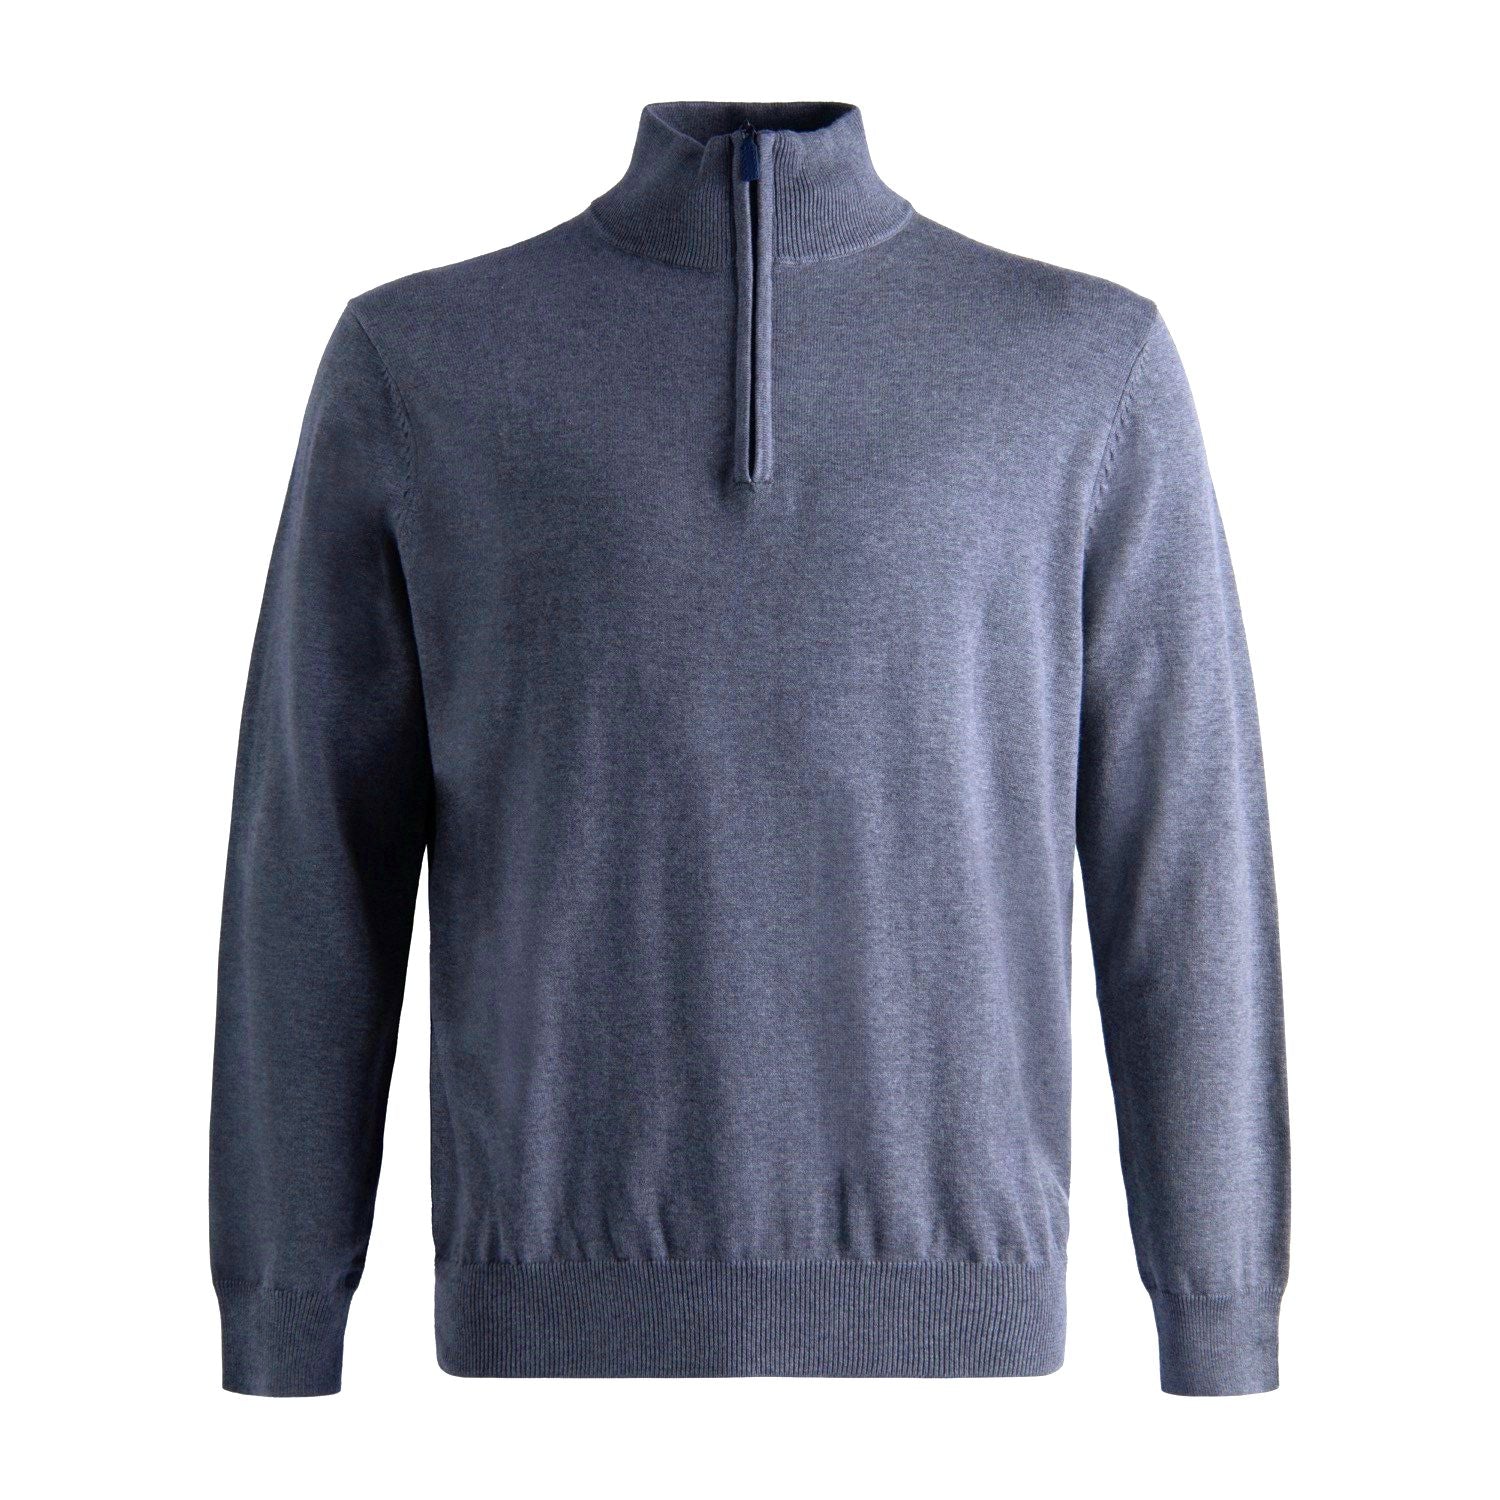 Cotton and Silk Blend Quarter-Zip Mock Neck Elbow Patch Sweater in Steel Blue by Viyella